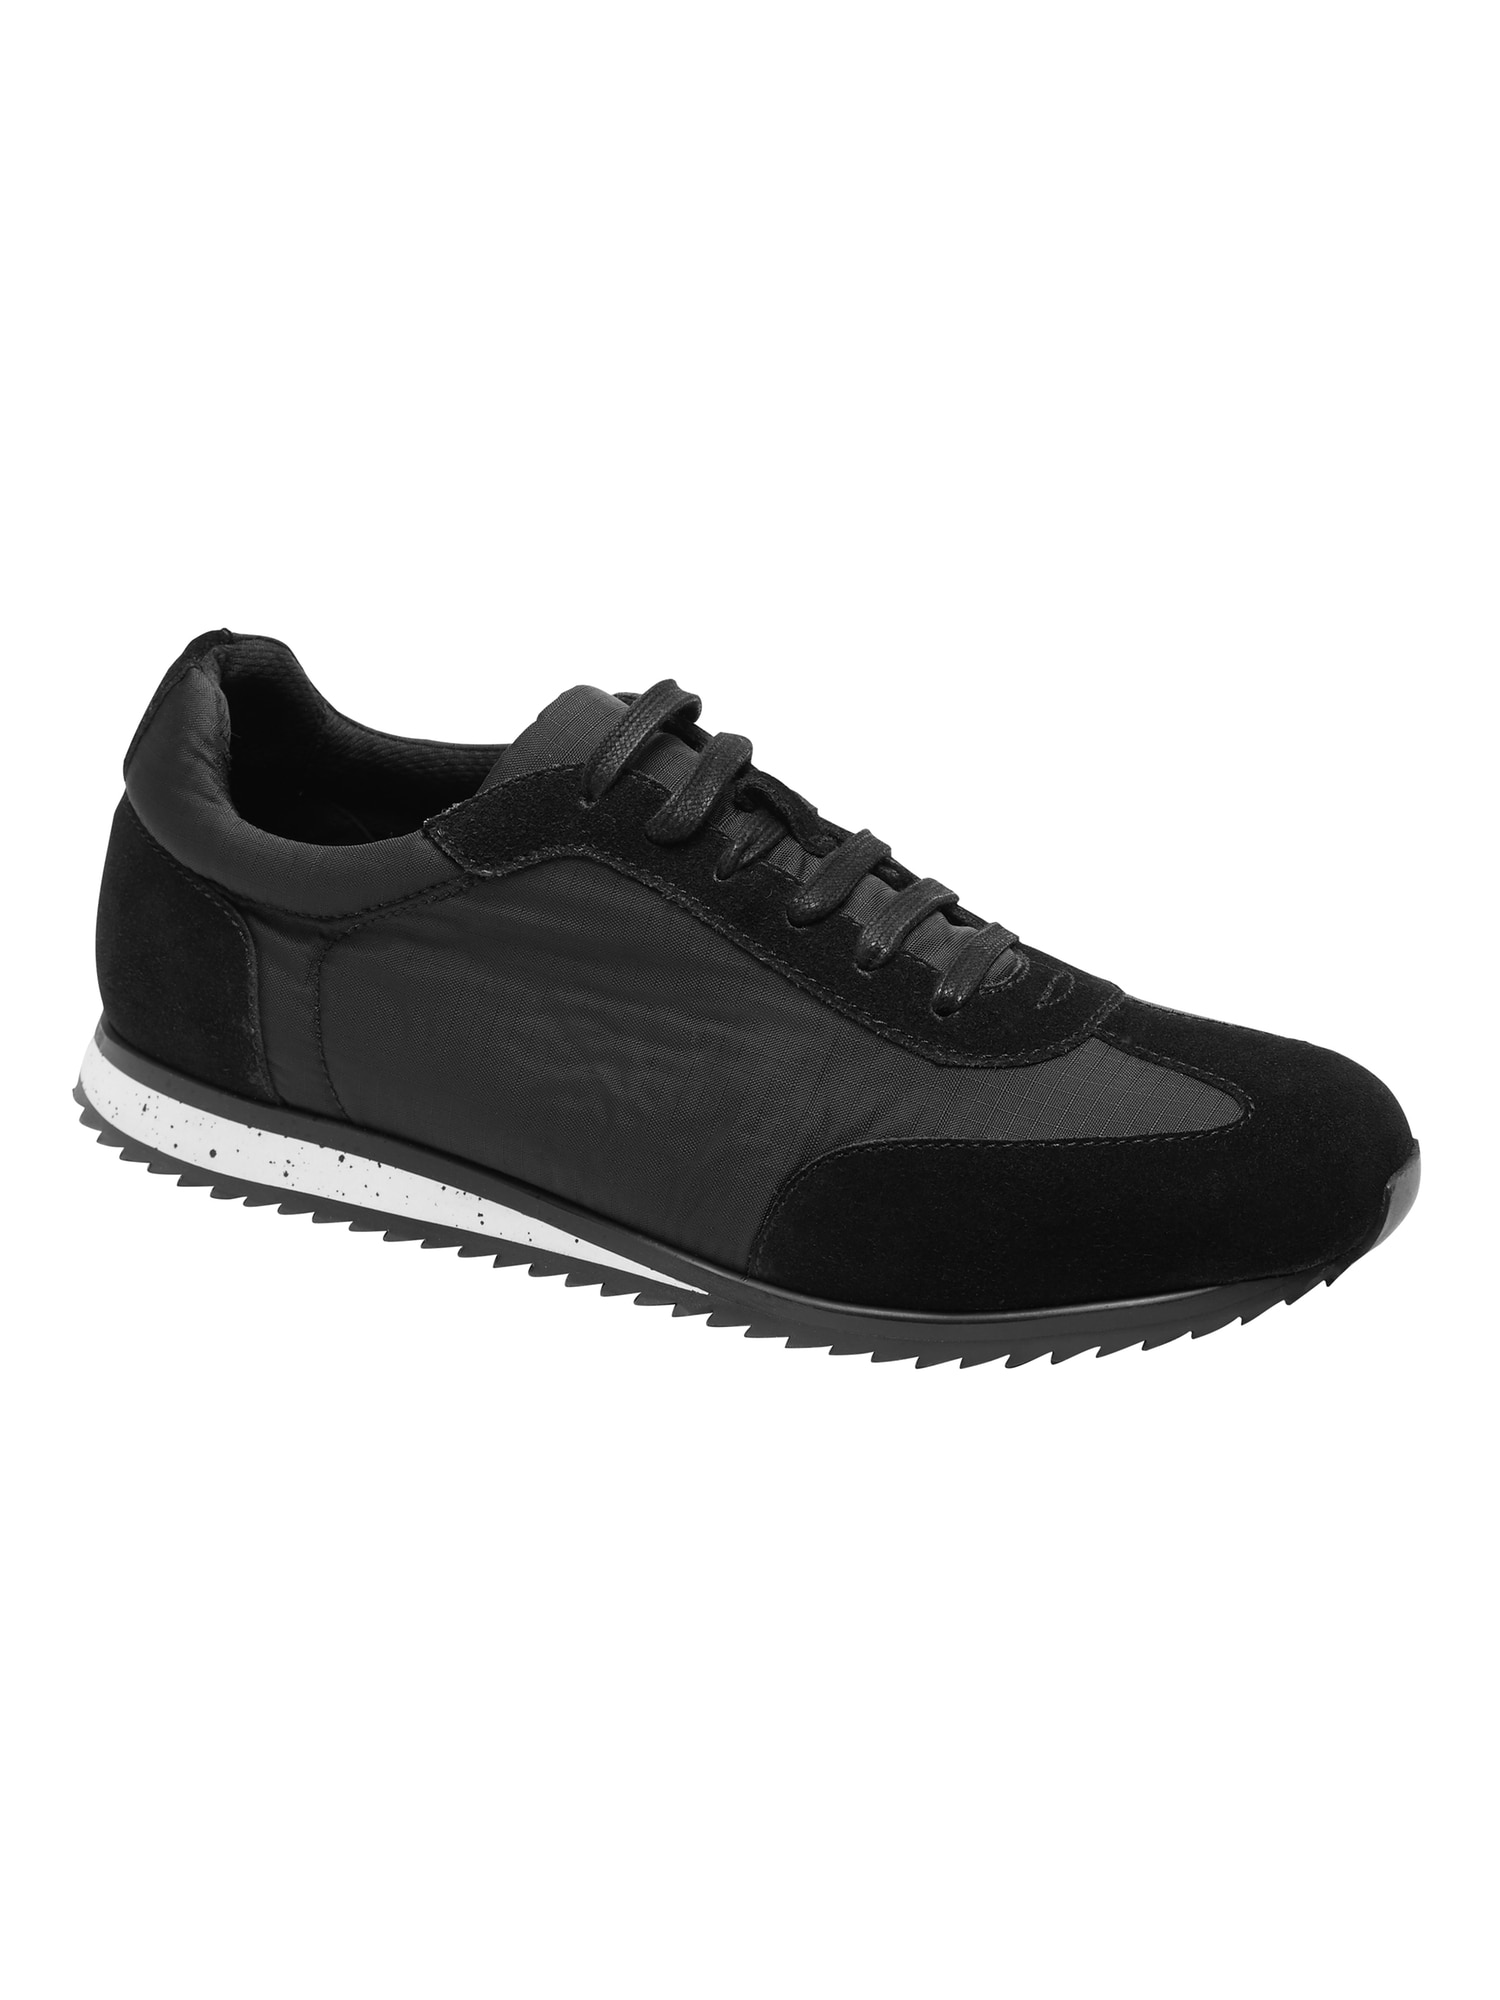 thane leather trainer sneaker